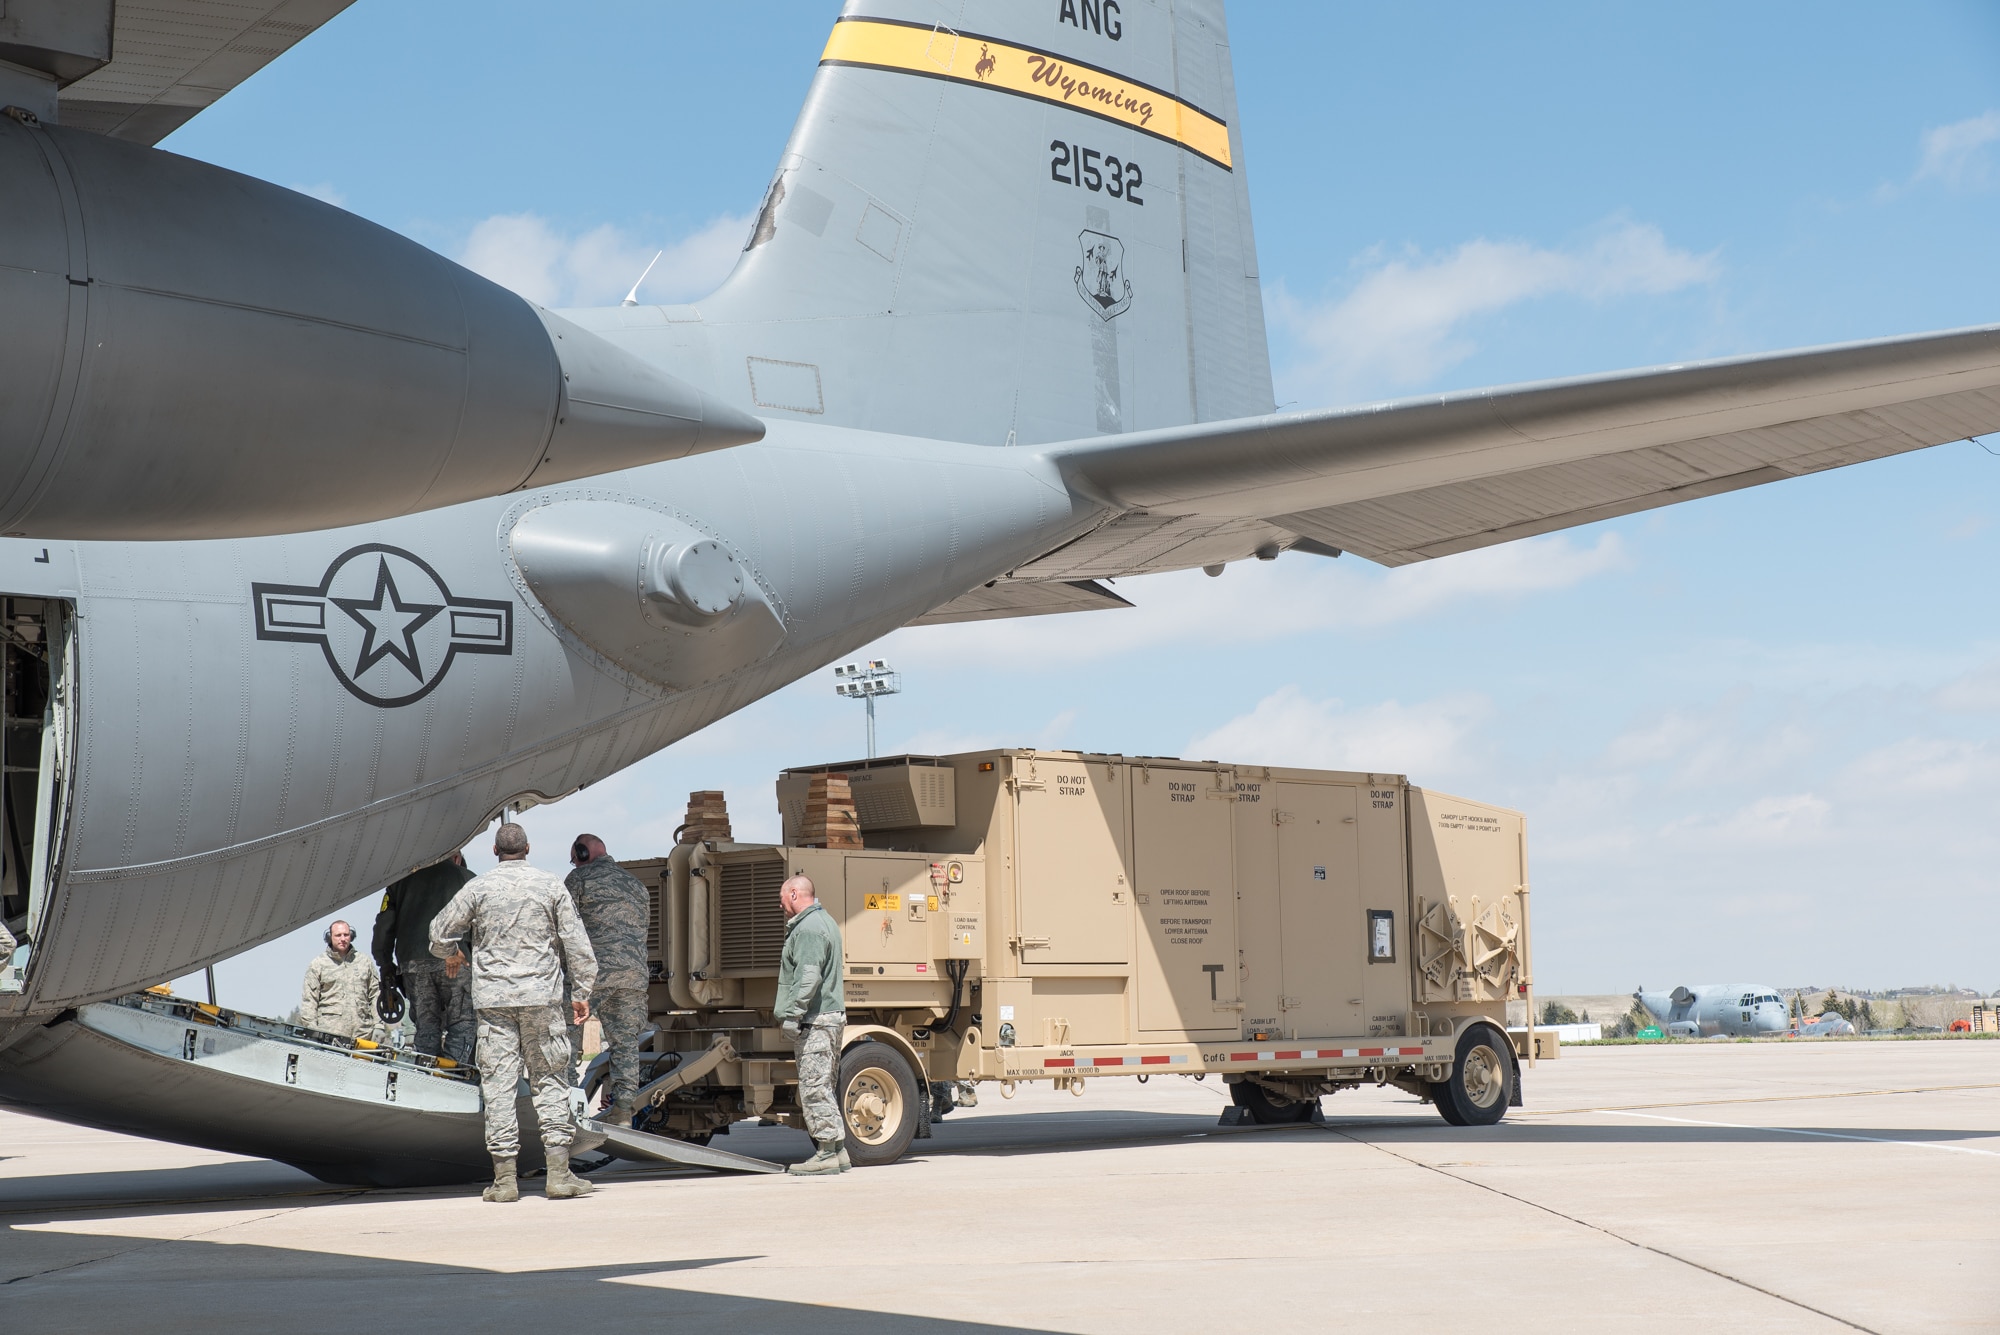 U.S. Air Force Airmen assigned to the Wyoming Air National Guard load a TRN-48 Tactical Air Navigation (TACAN) system on a C-130H Hercules aircraft Apr. 28, 2015 at Cheyenne Air National Guard base in Cheyenne, Wyoming. Guardsmen representing logistics, operations, maintenance, and air traffic control collaborated to load the equipment for the first time on a Wyoming C-130. Over 50 Airmen from the 243 Air Traffic Control Squadron are departing to Volk Field, Wisconsin to perform preparation and setup training for Deployable Air Traffic Control Landing Systems. (U.S. Air National Guard photo by Master Sgt. Charles Delano)